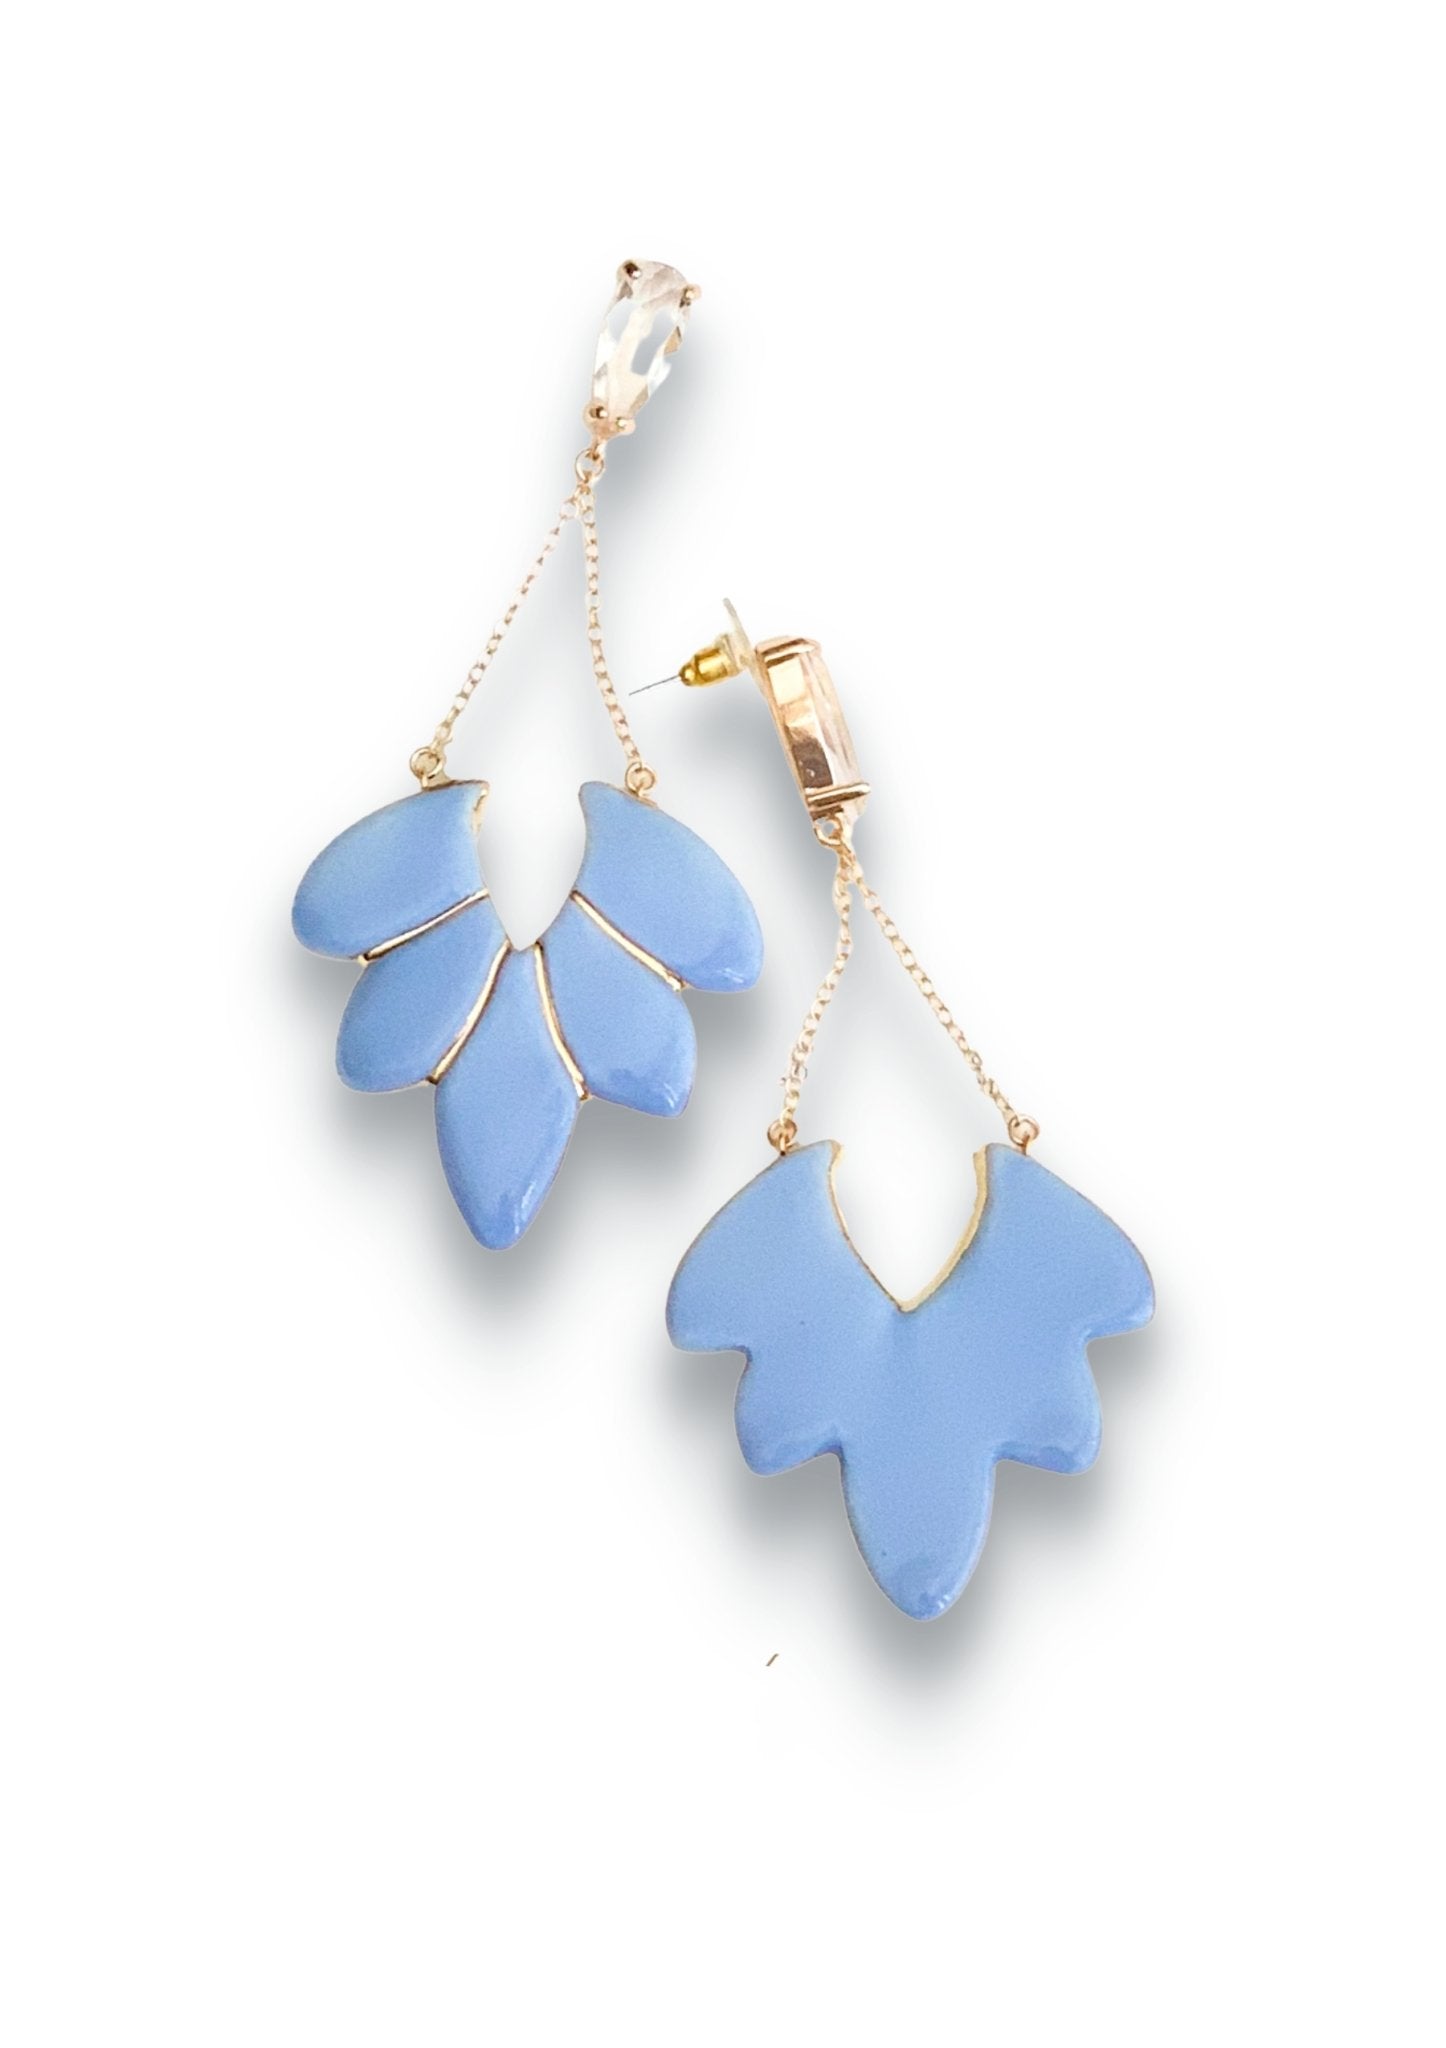 veuve-statement-earring-French-blue-susan-gordon-accessories-jewelry-earrings-georgia-kate